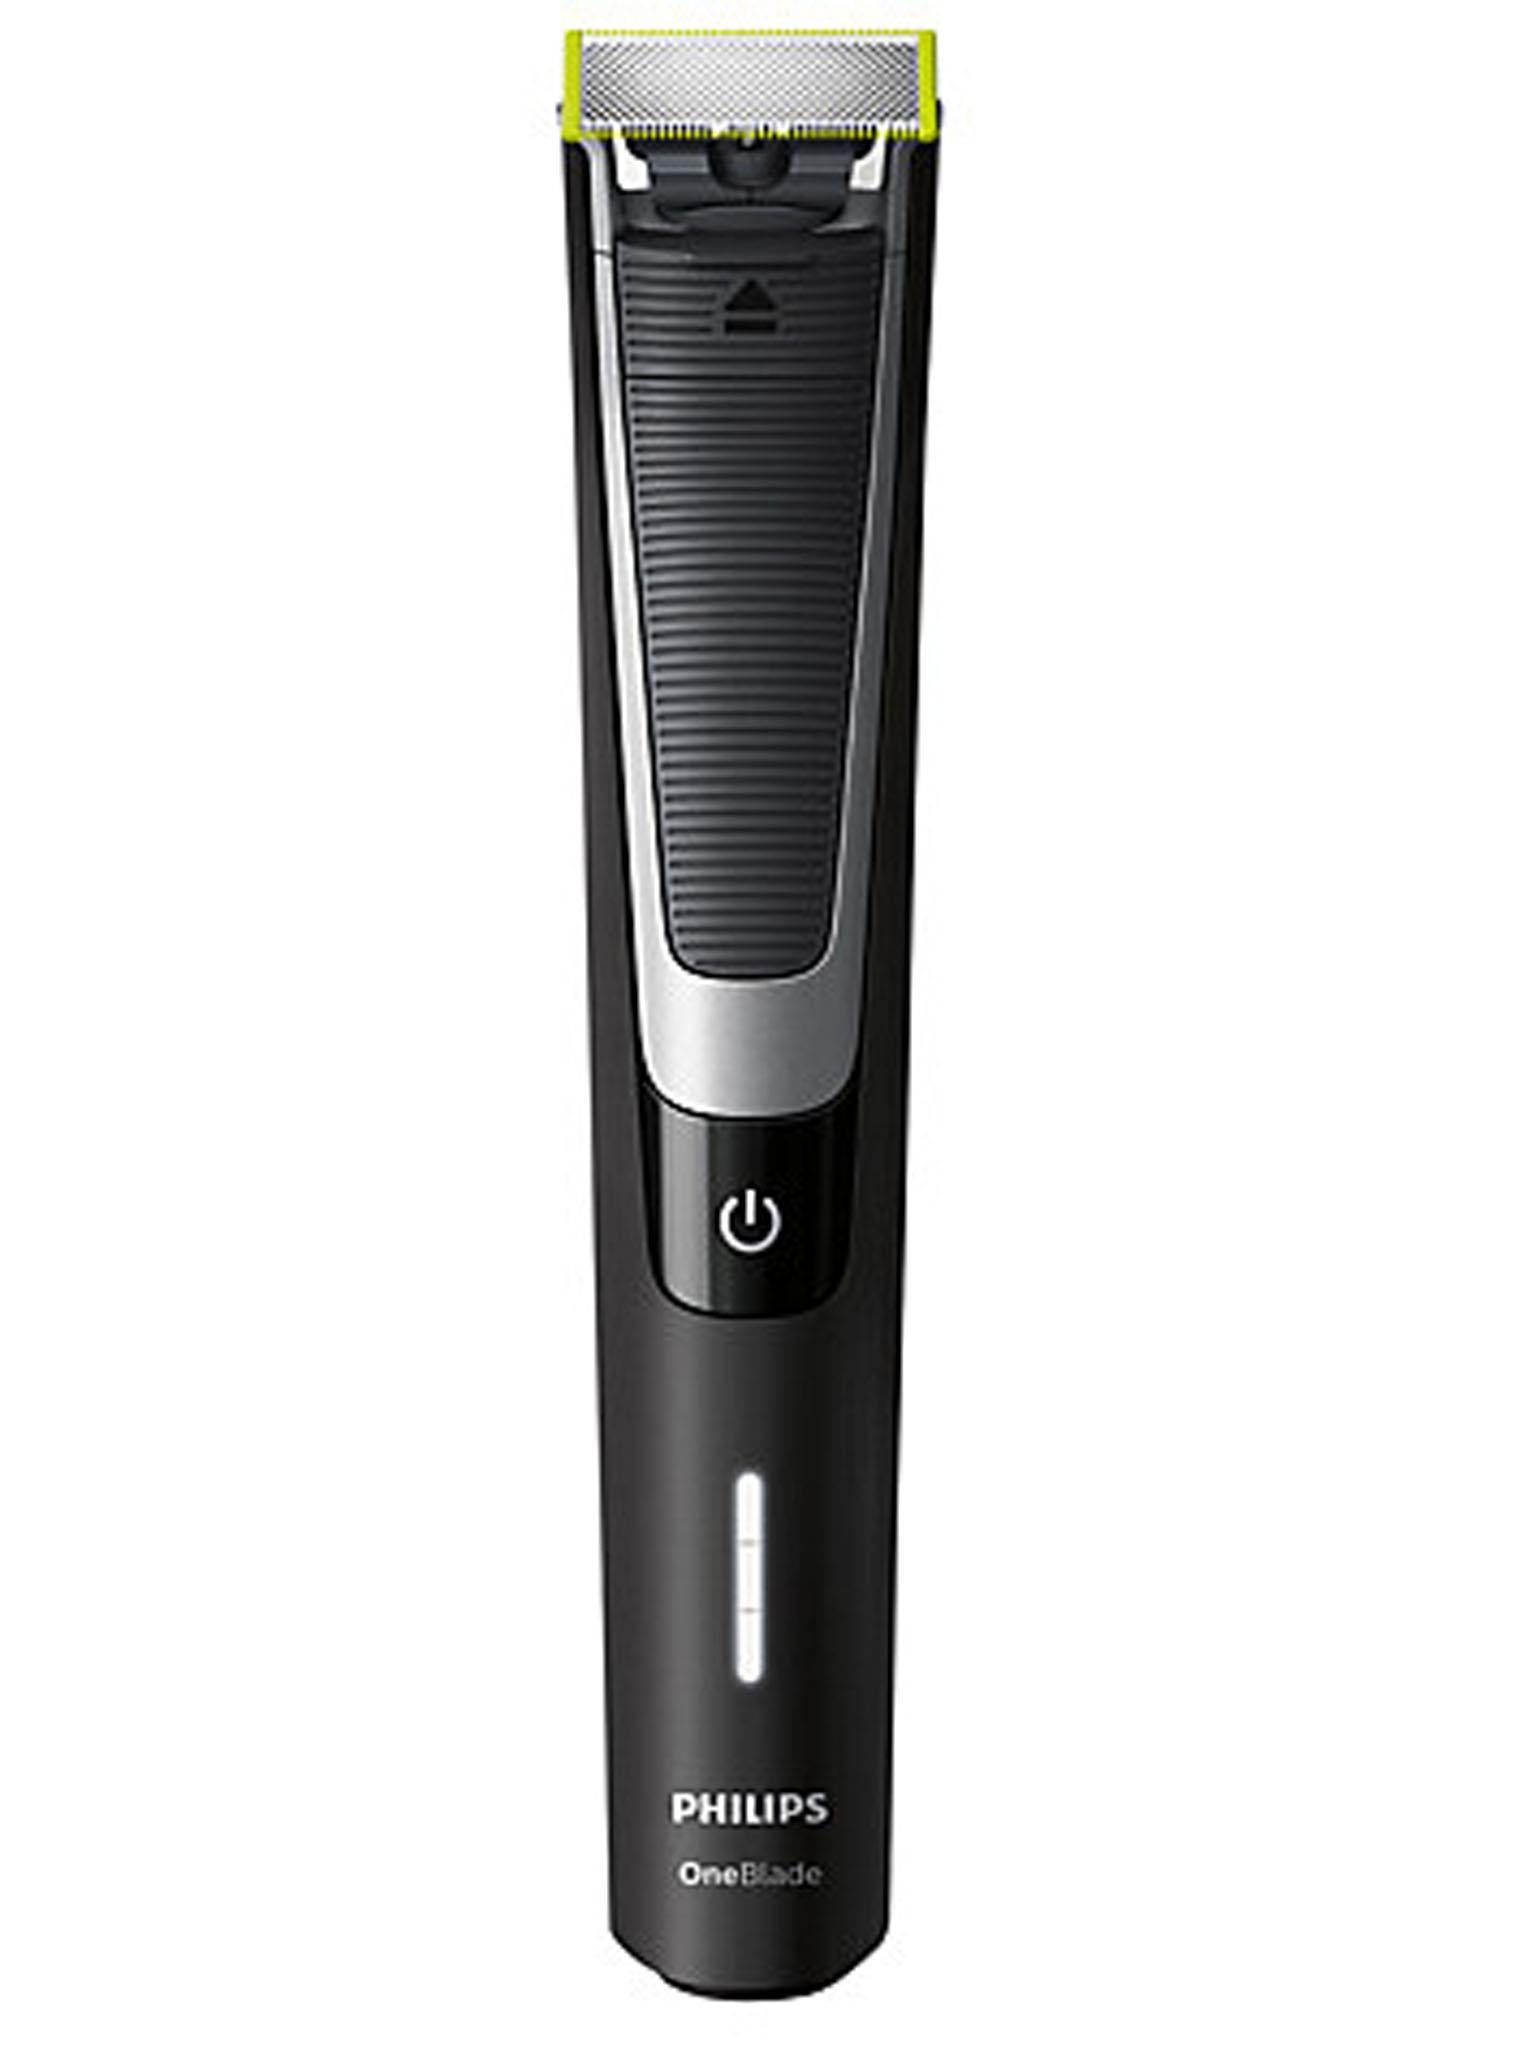 Phillips OneBlade Pro Styler and Shaver